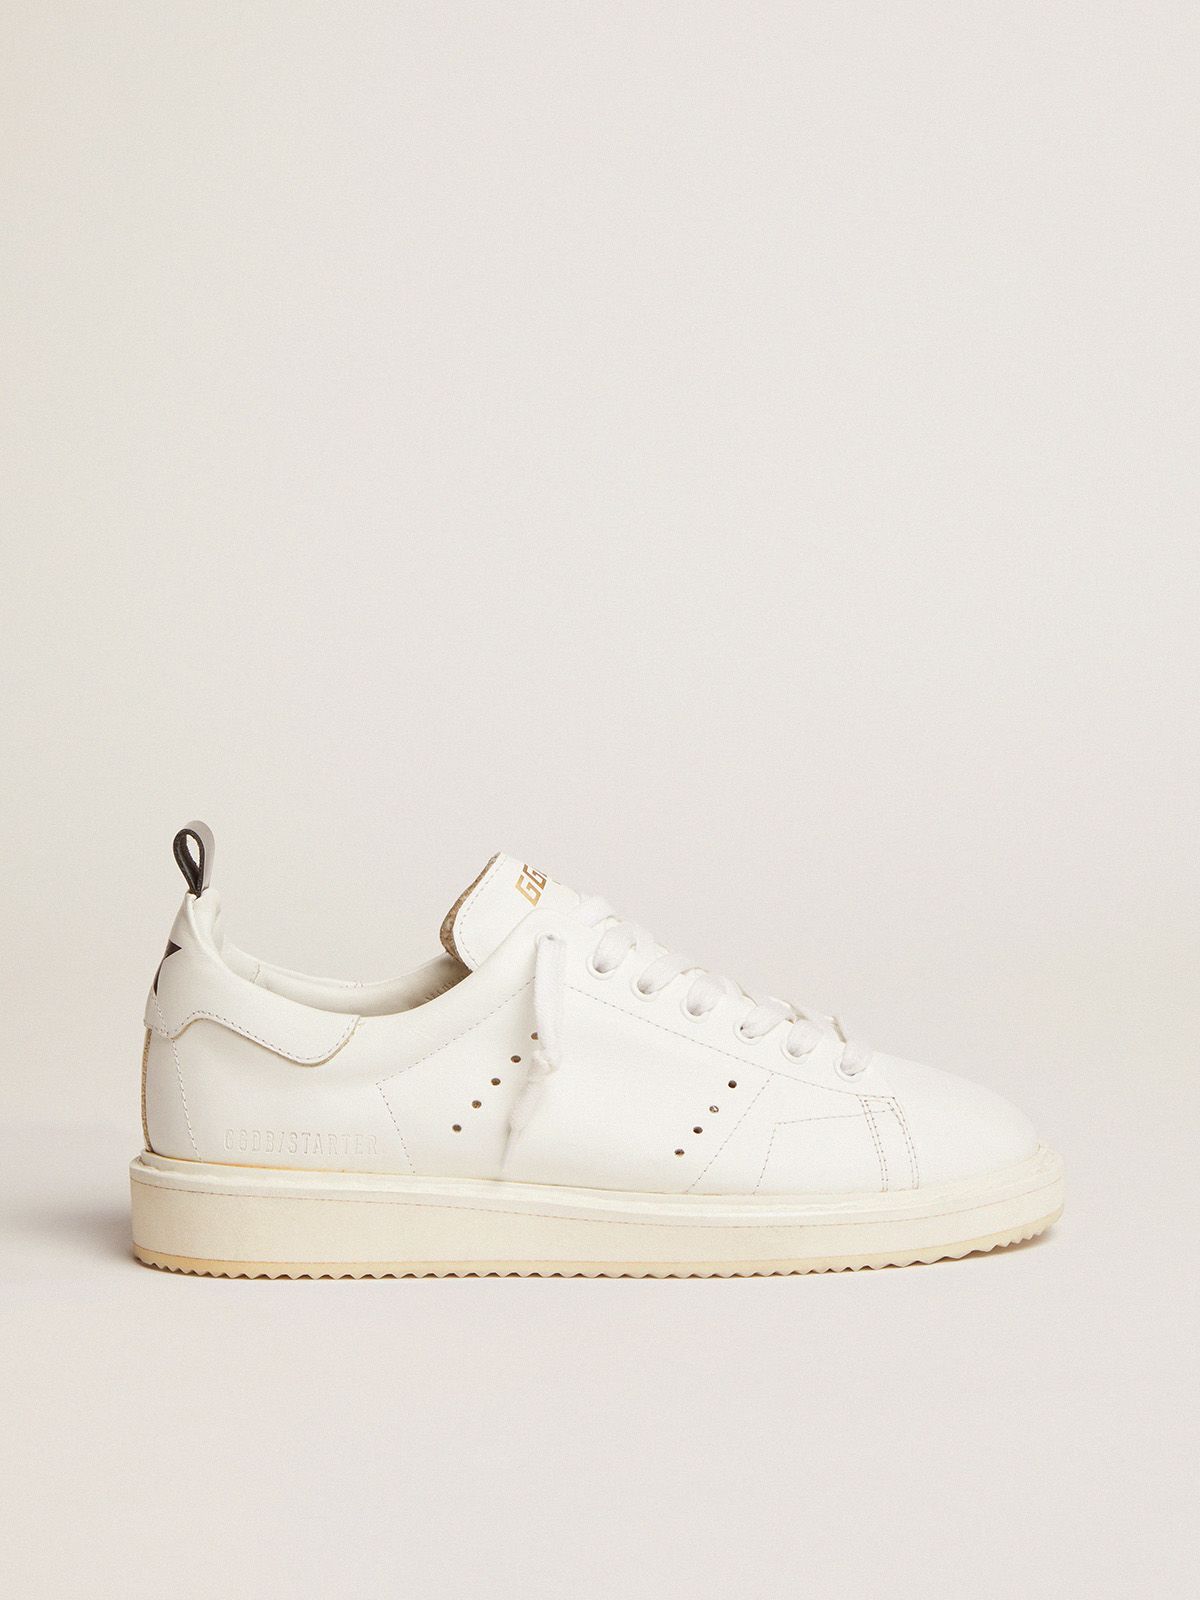 golden goose leather sneakers white Starter in total